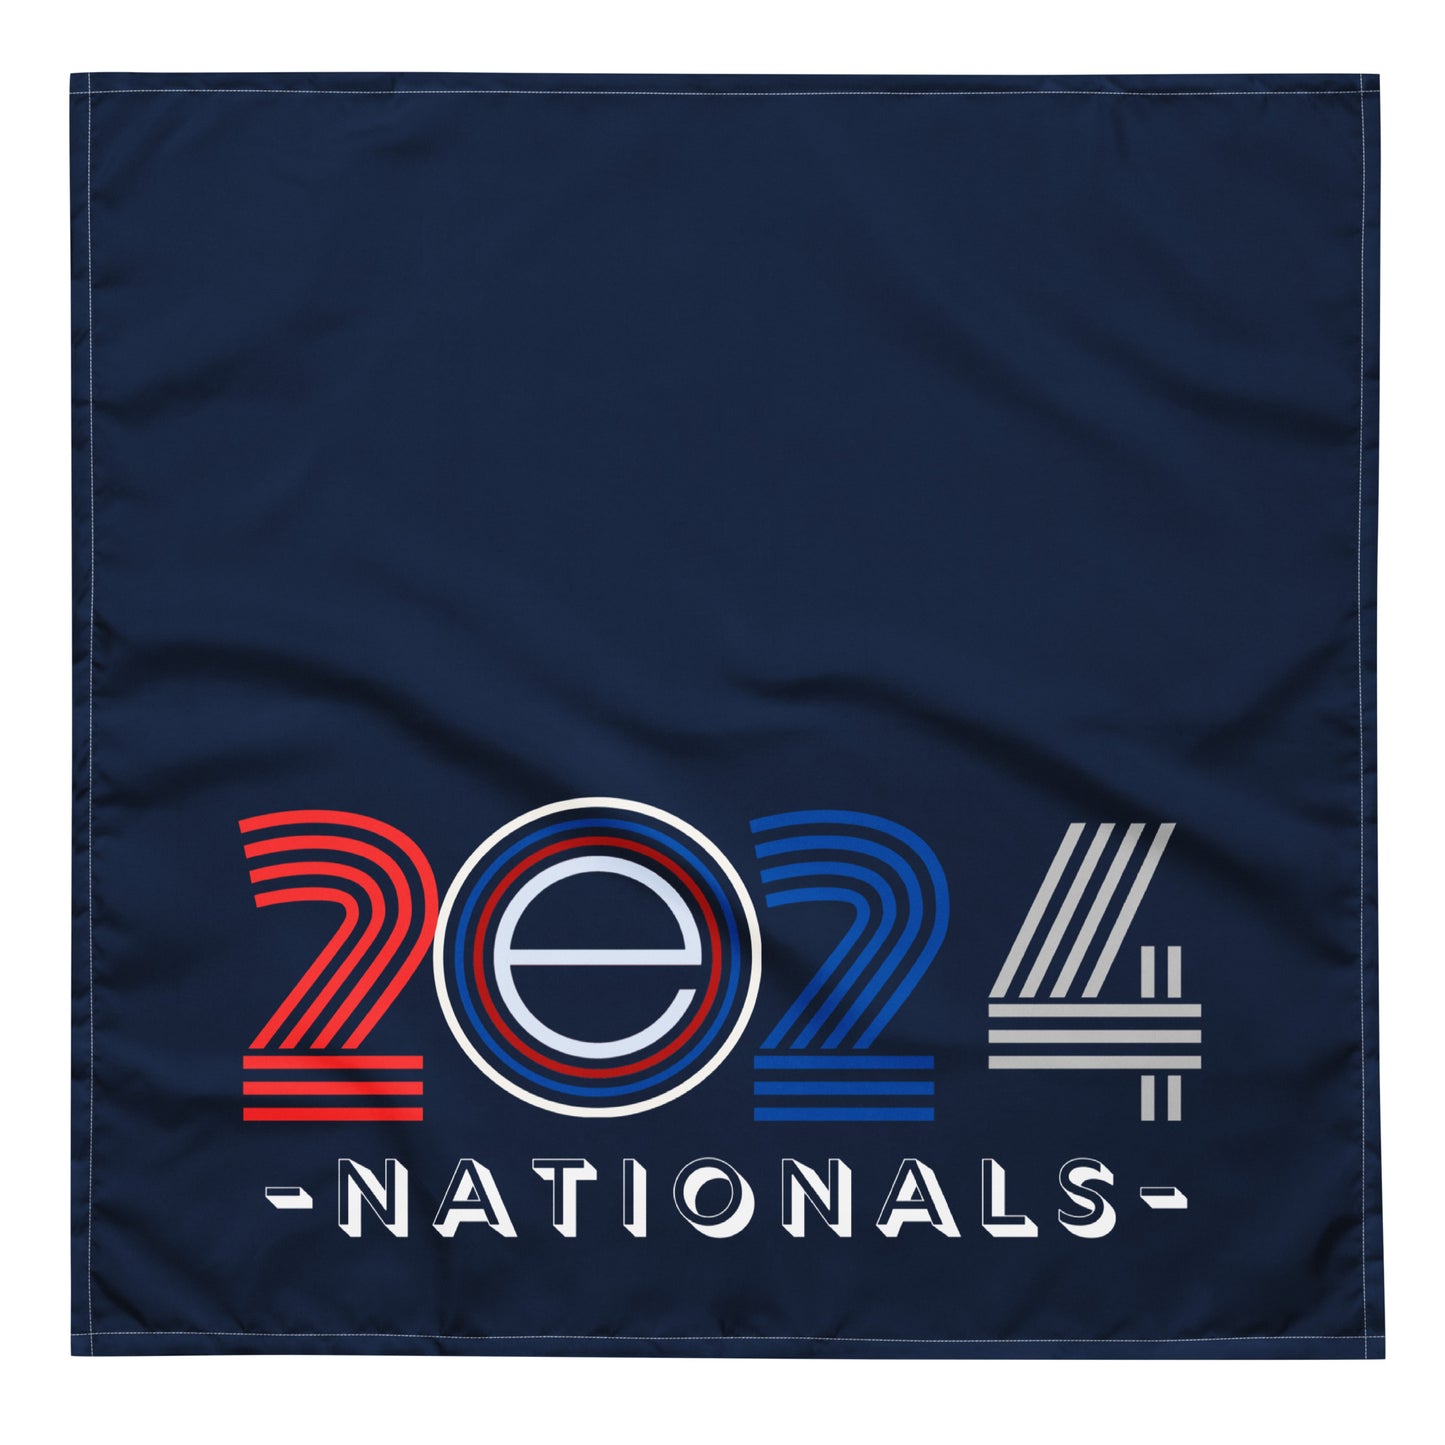 ExcelNationals-All-over print bandana